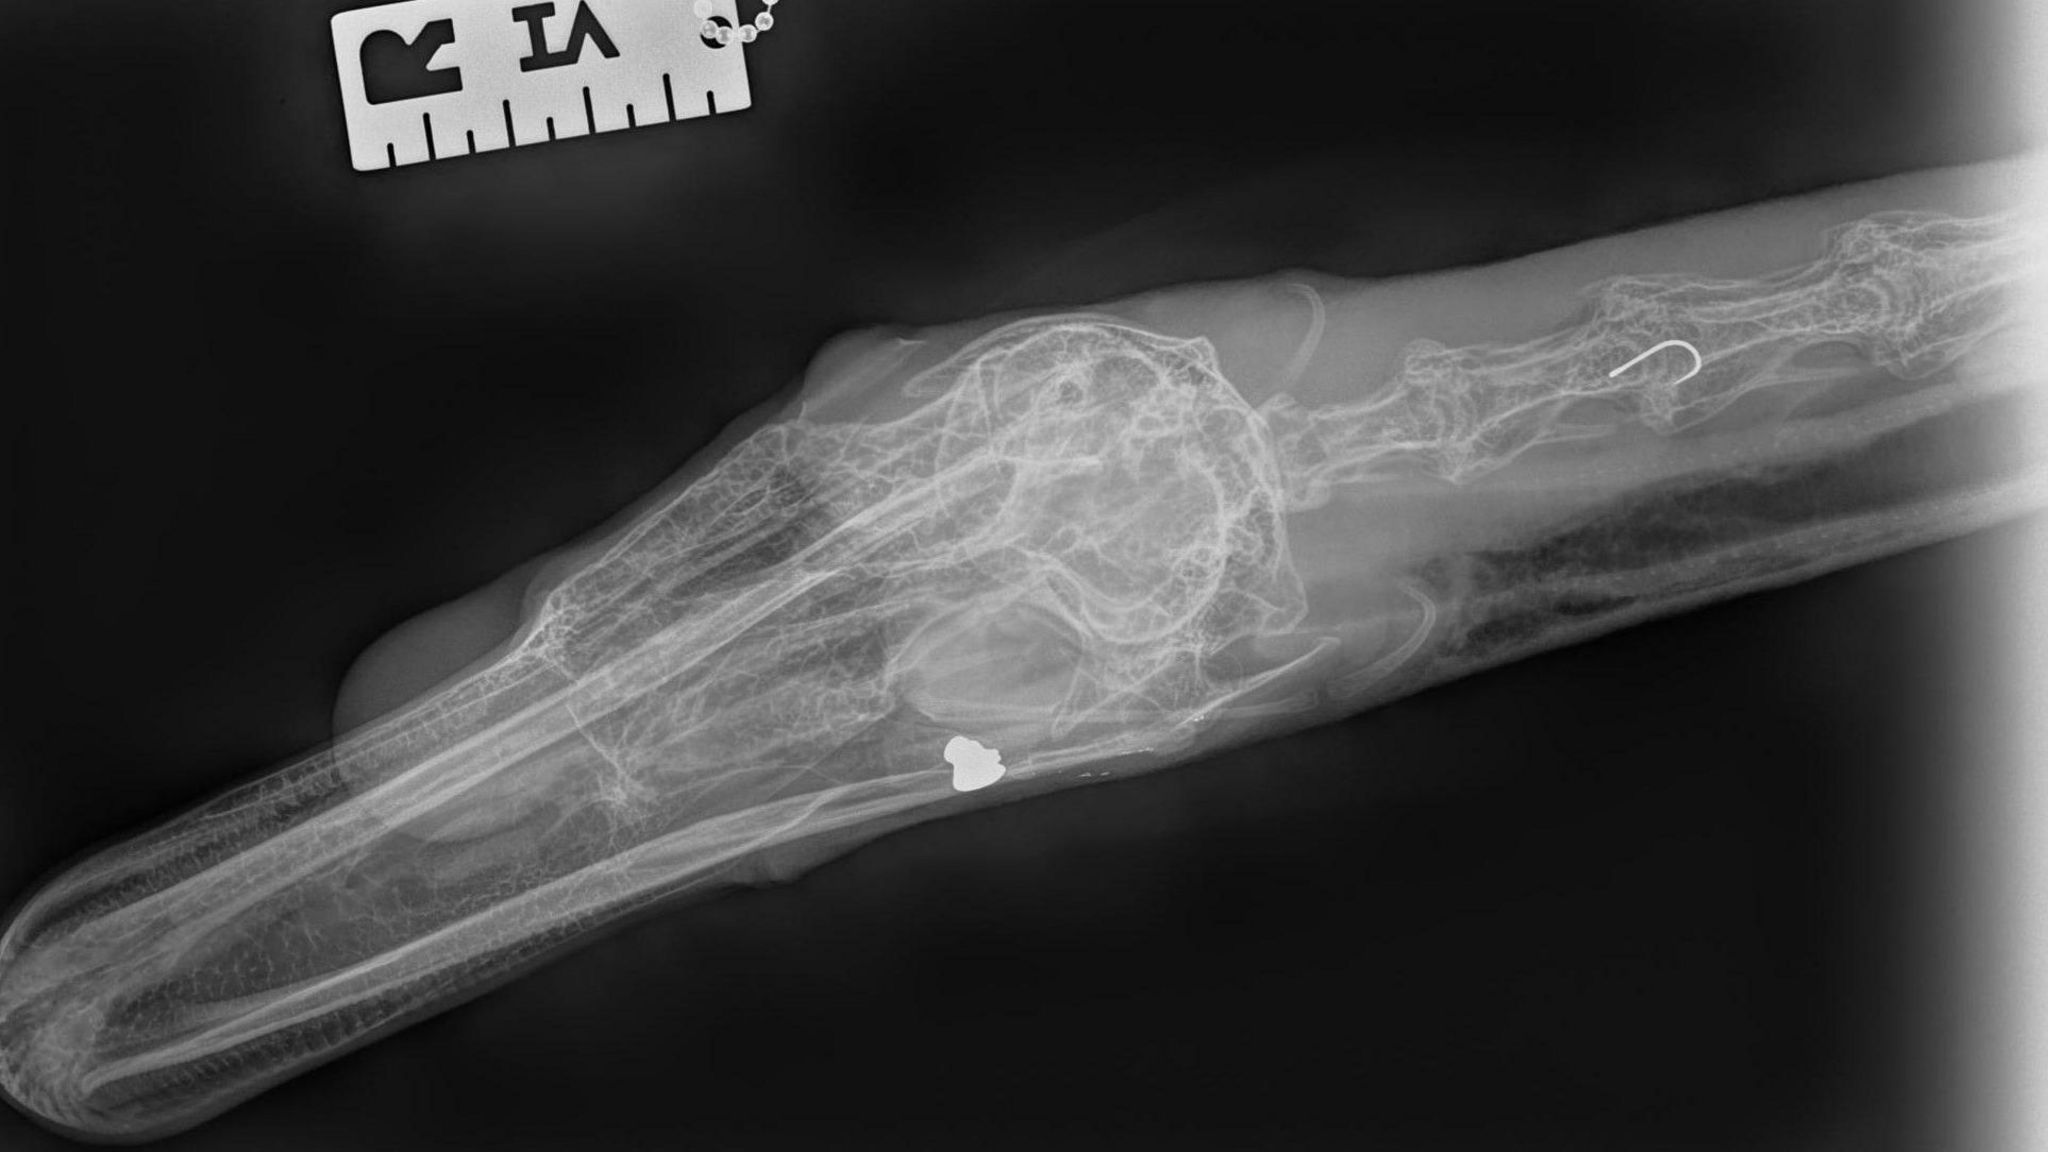 X-ray results of the swan